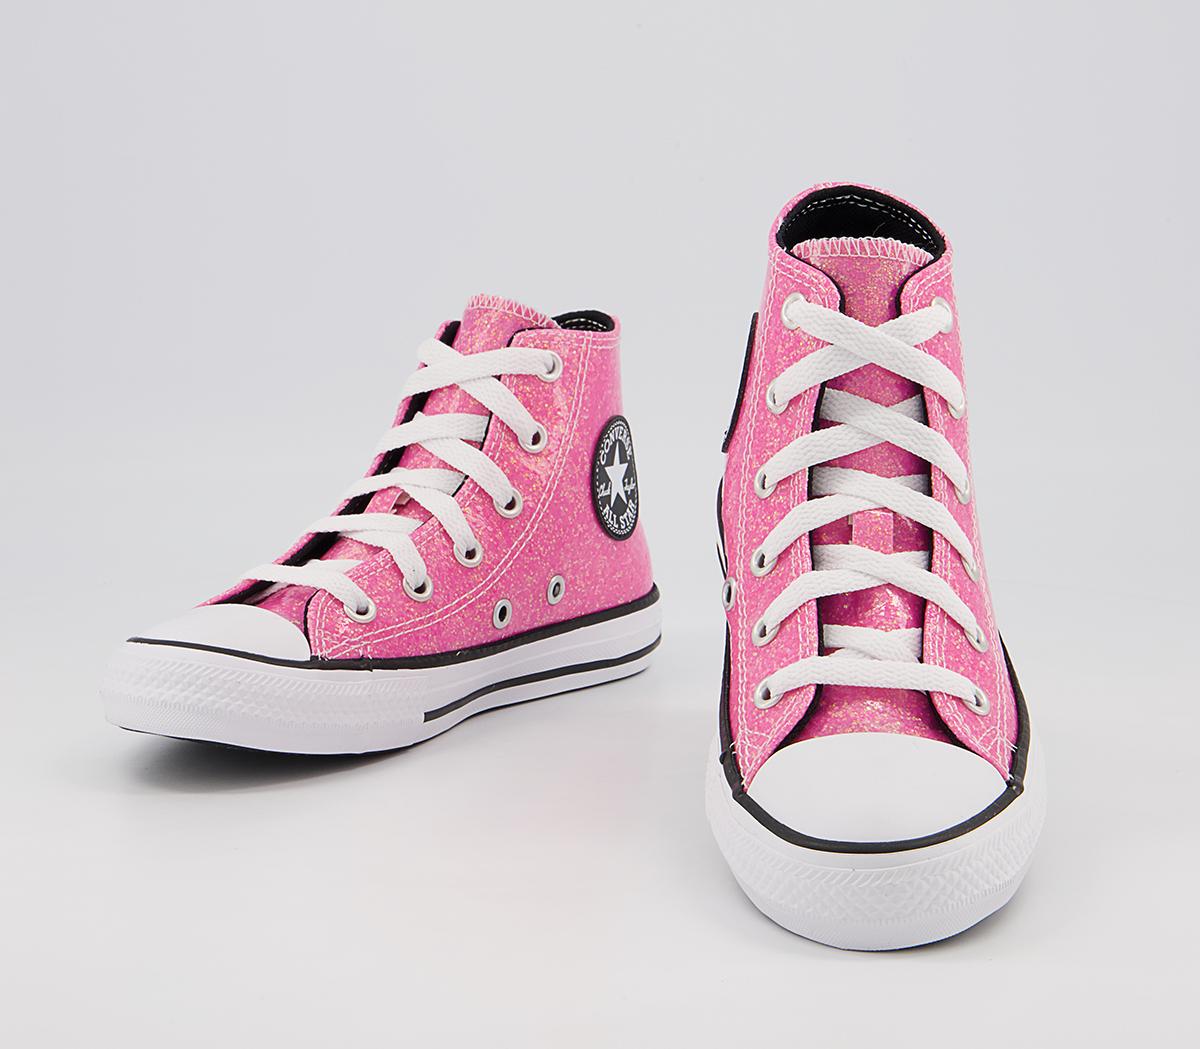 Converse All Star Hi Youth Trainers Pink Black White Glitter - Unisex